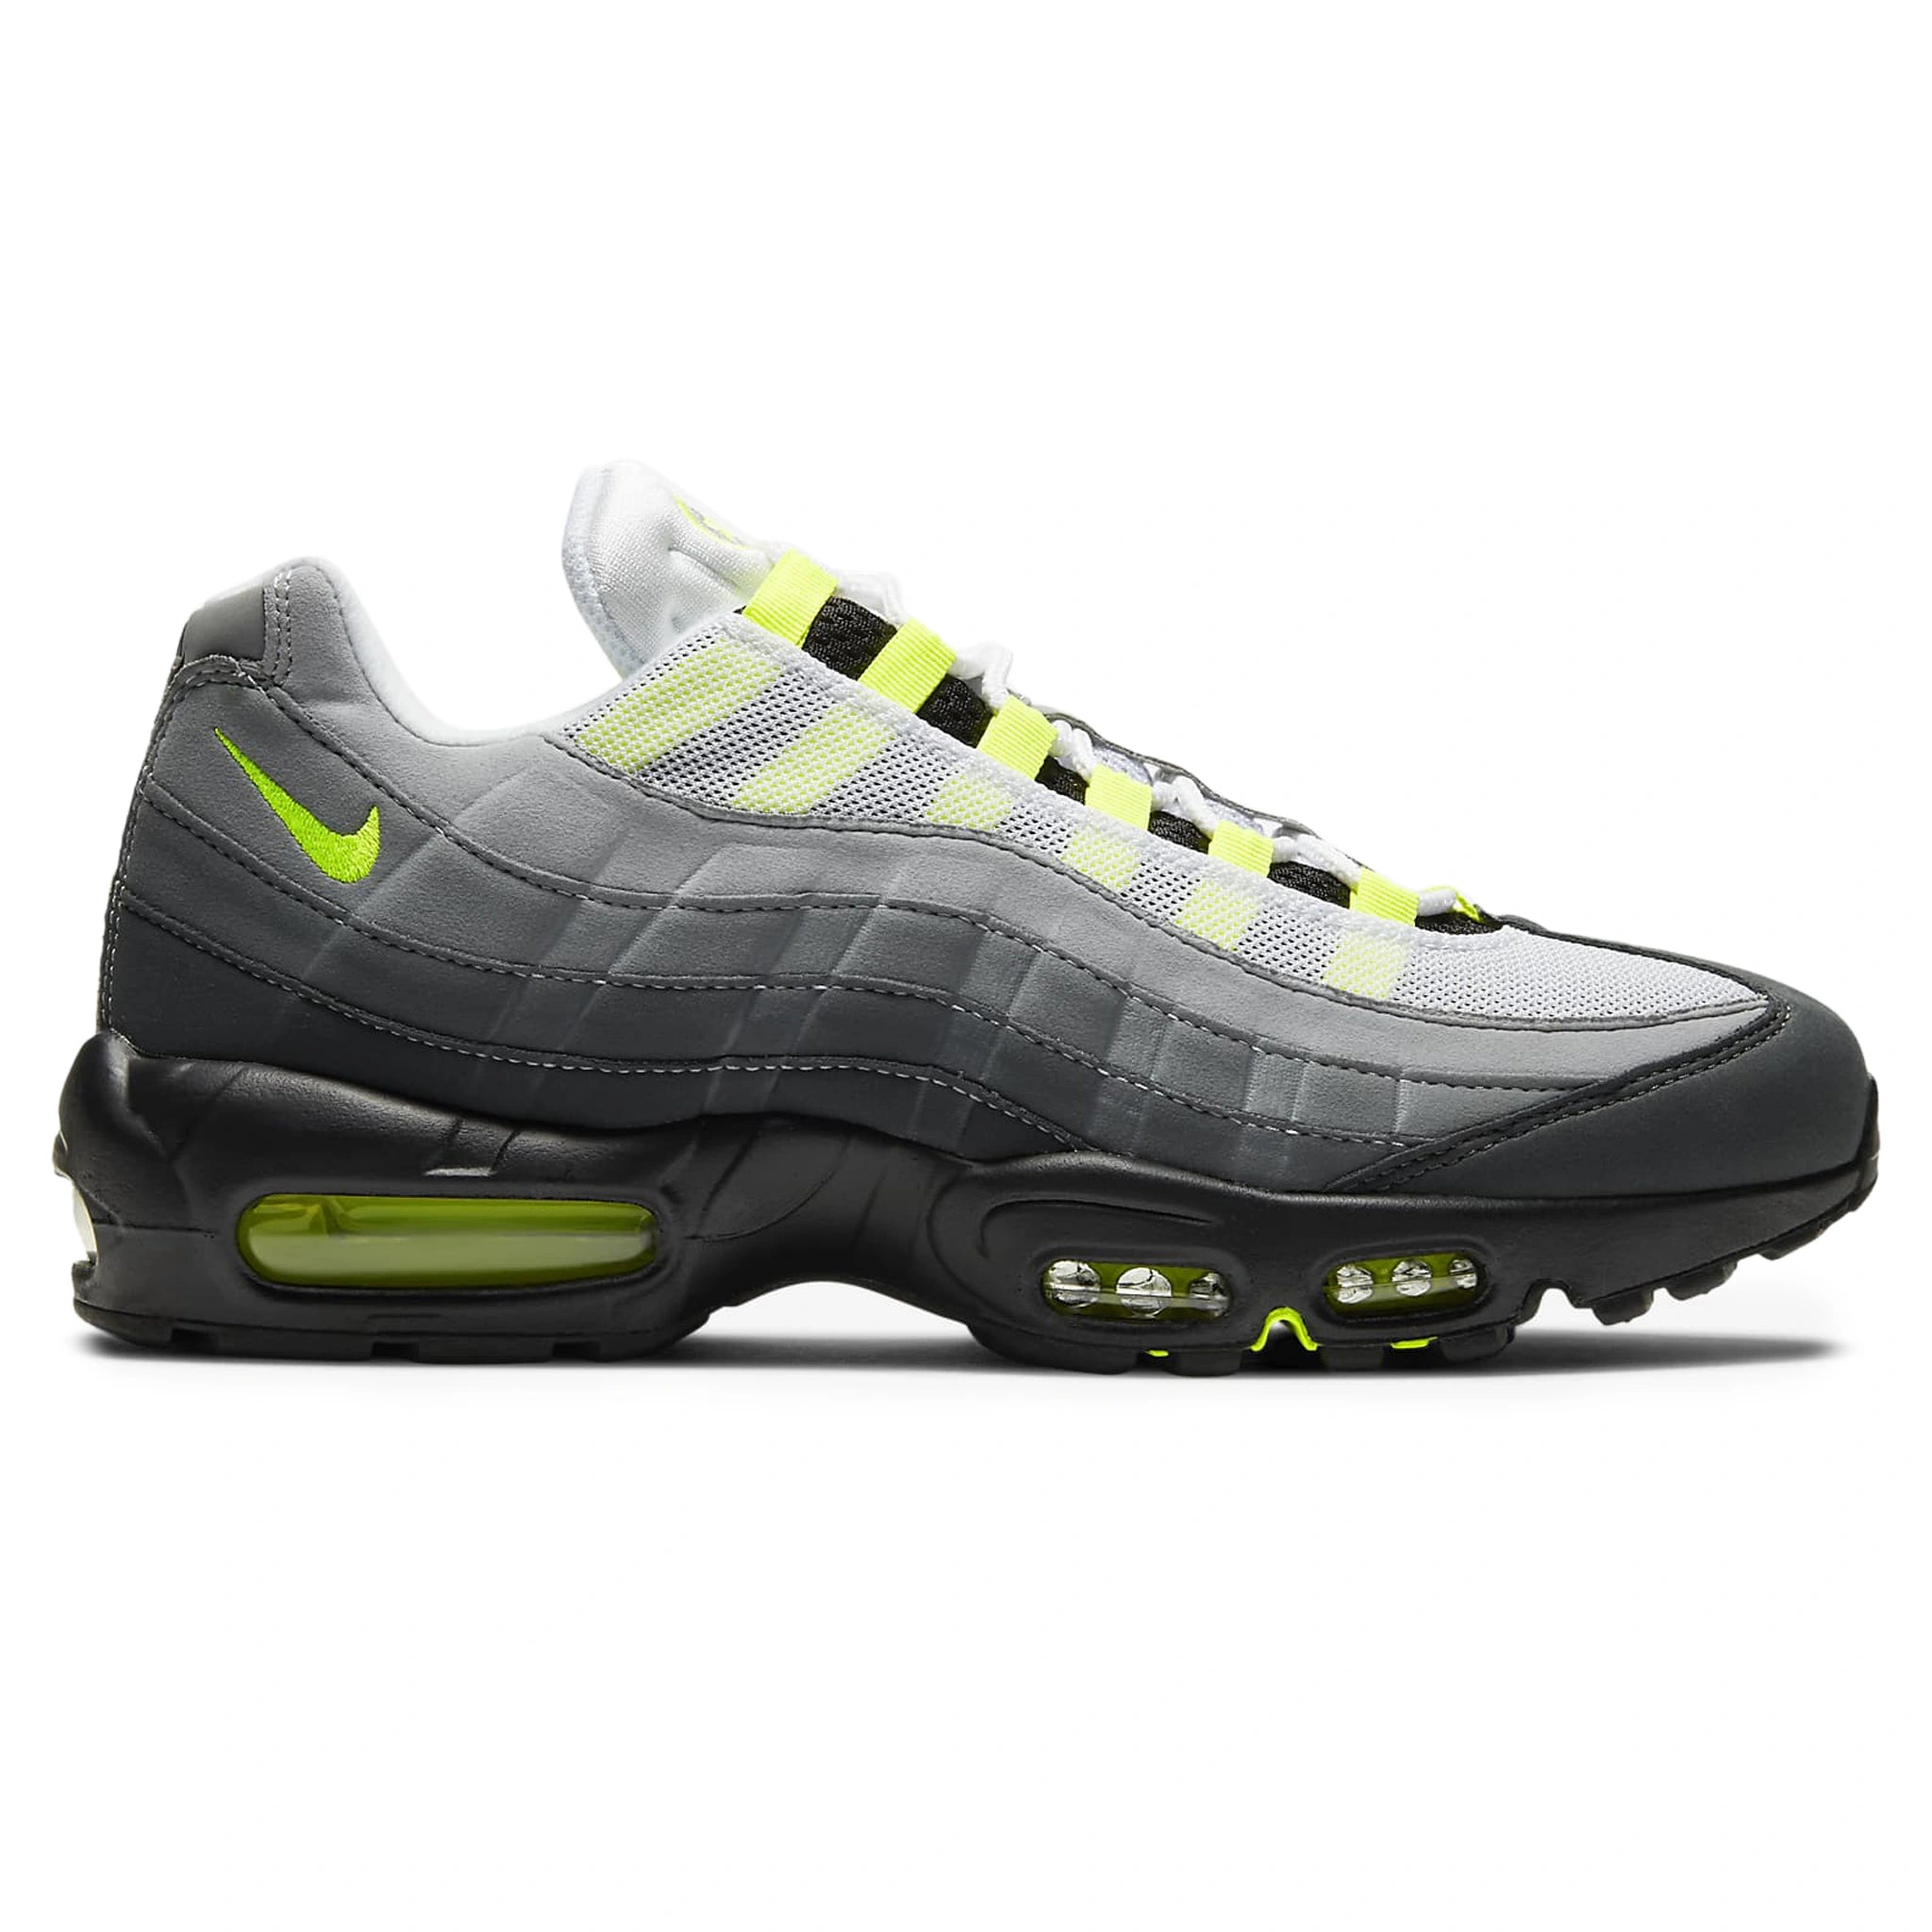 Side view of Nike Air Max 95 OG Neon CT1689-001 